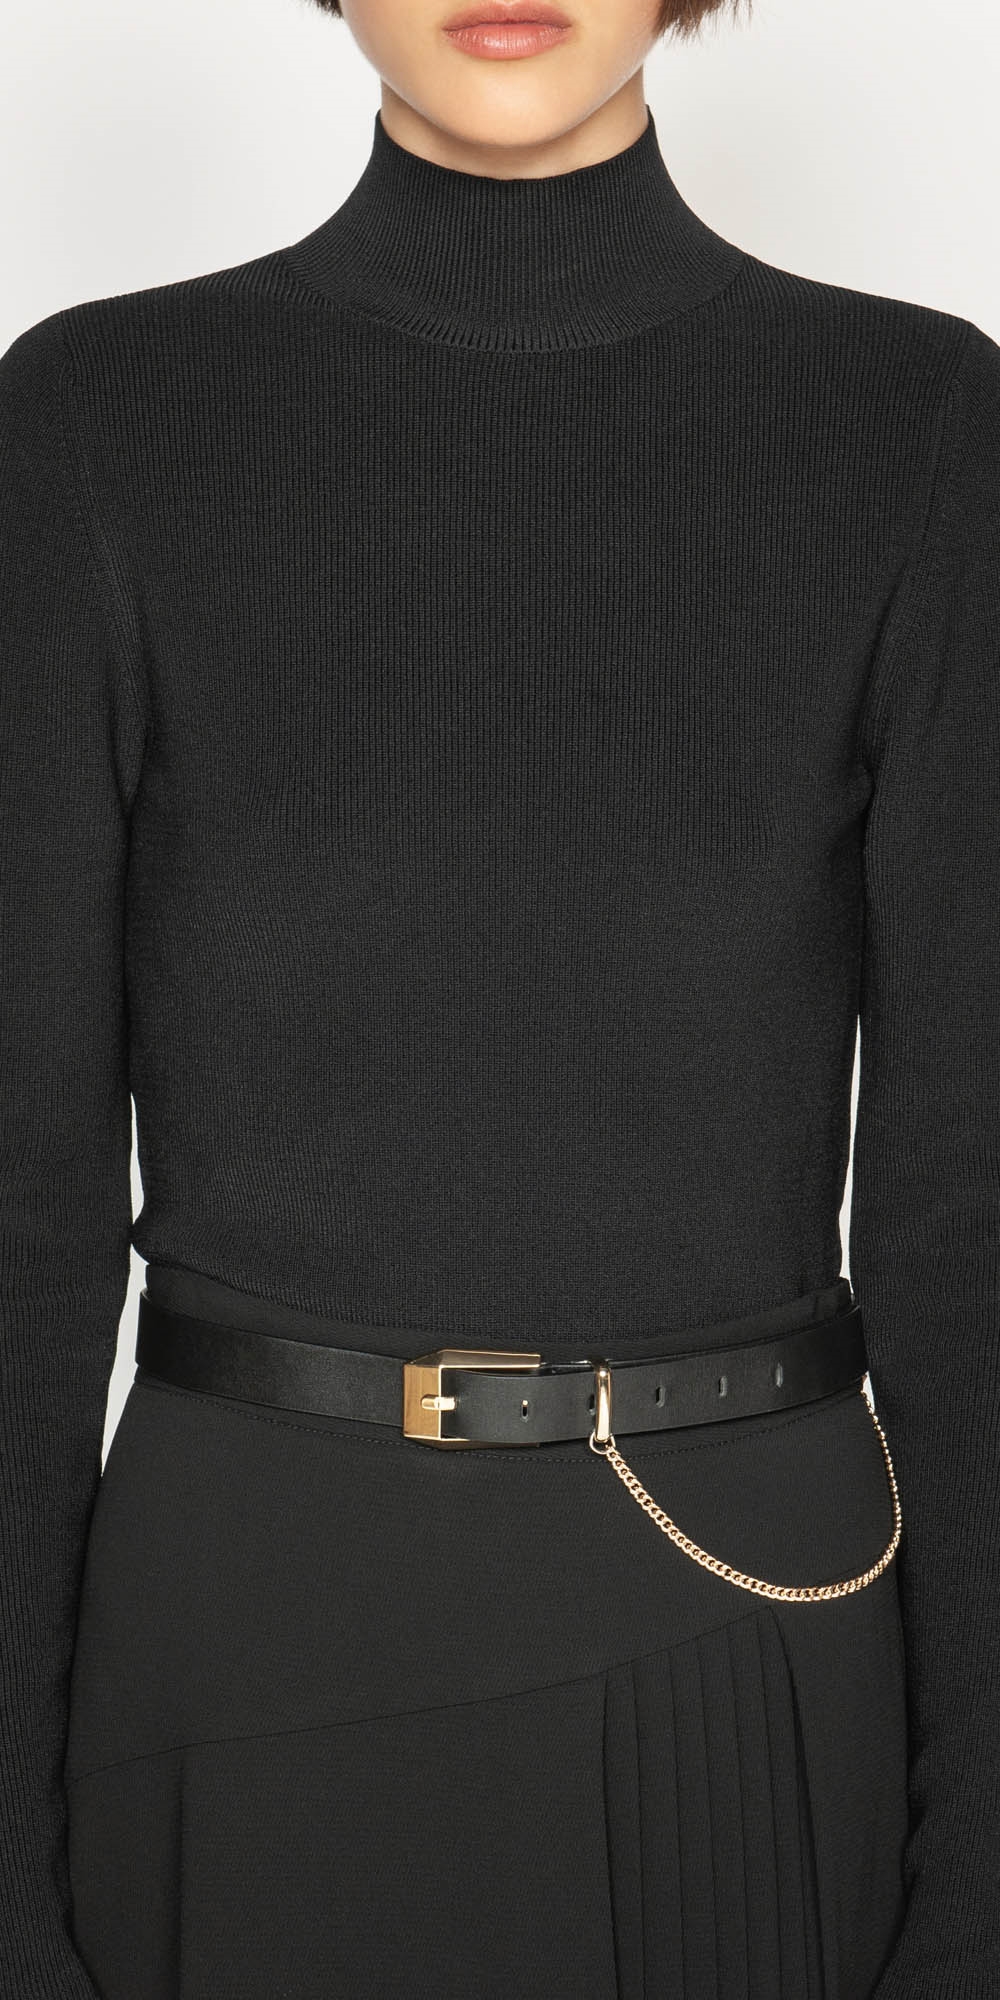 Gold Chain Leather Belt | Buy Accessories Online - Cue